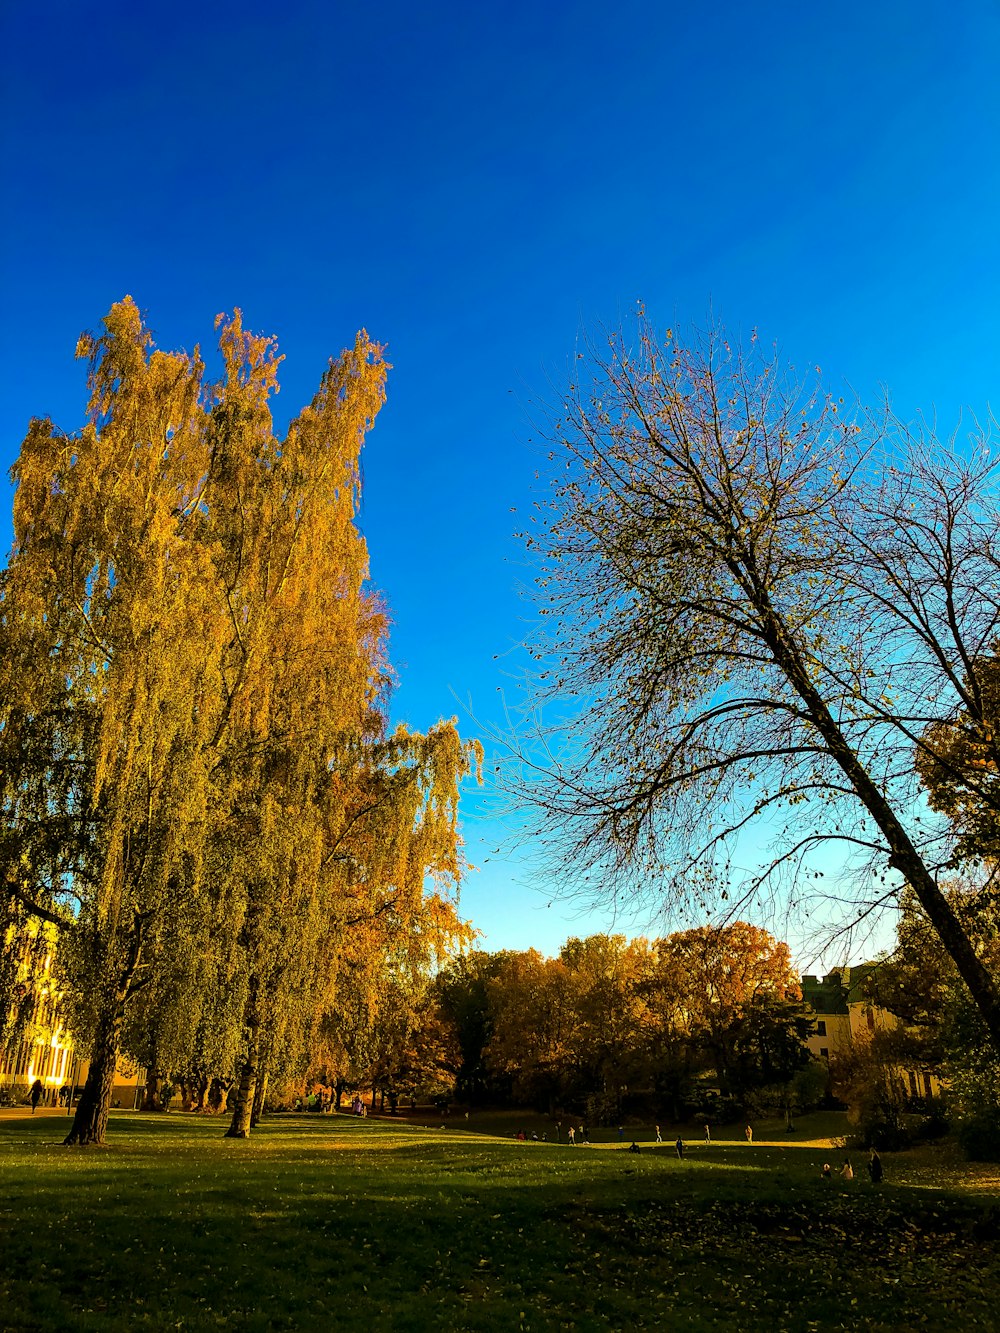 yellow willow tree under blue sky